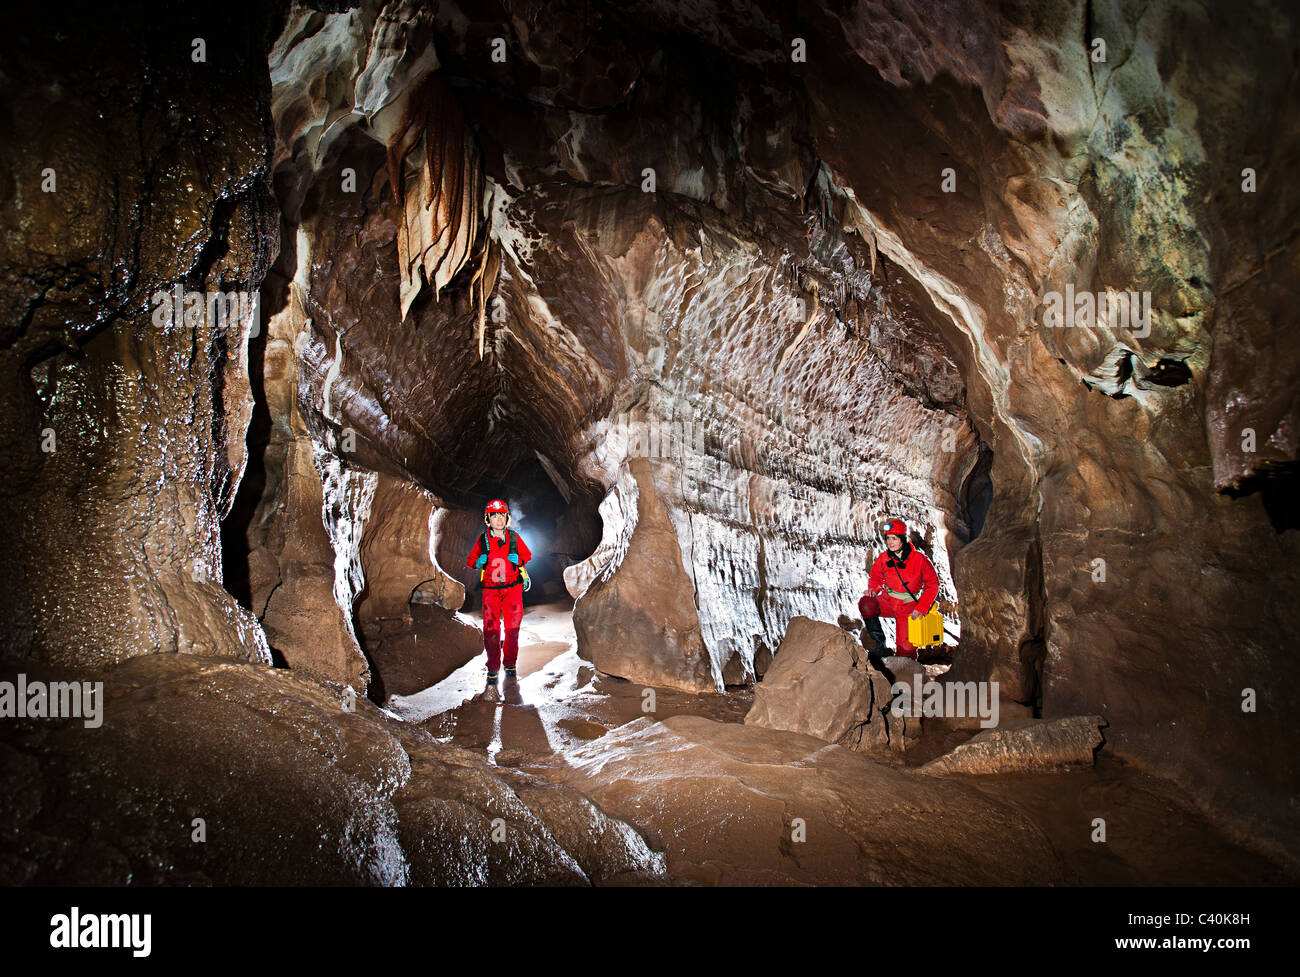 Cavers High Resolution Stock Photography and Images - Alamy